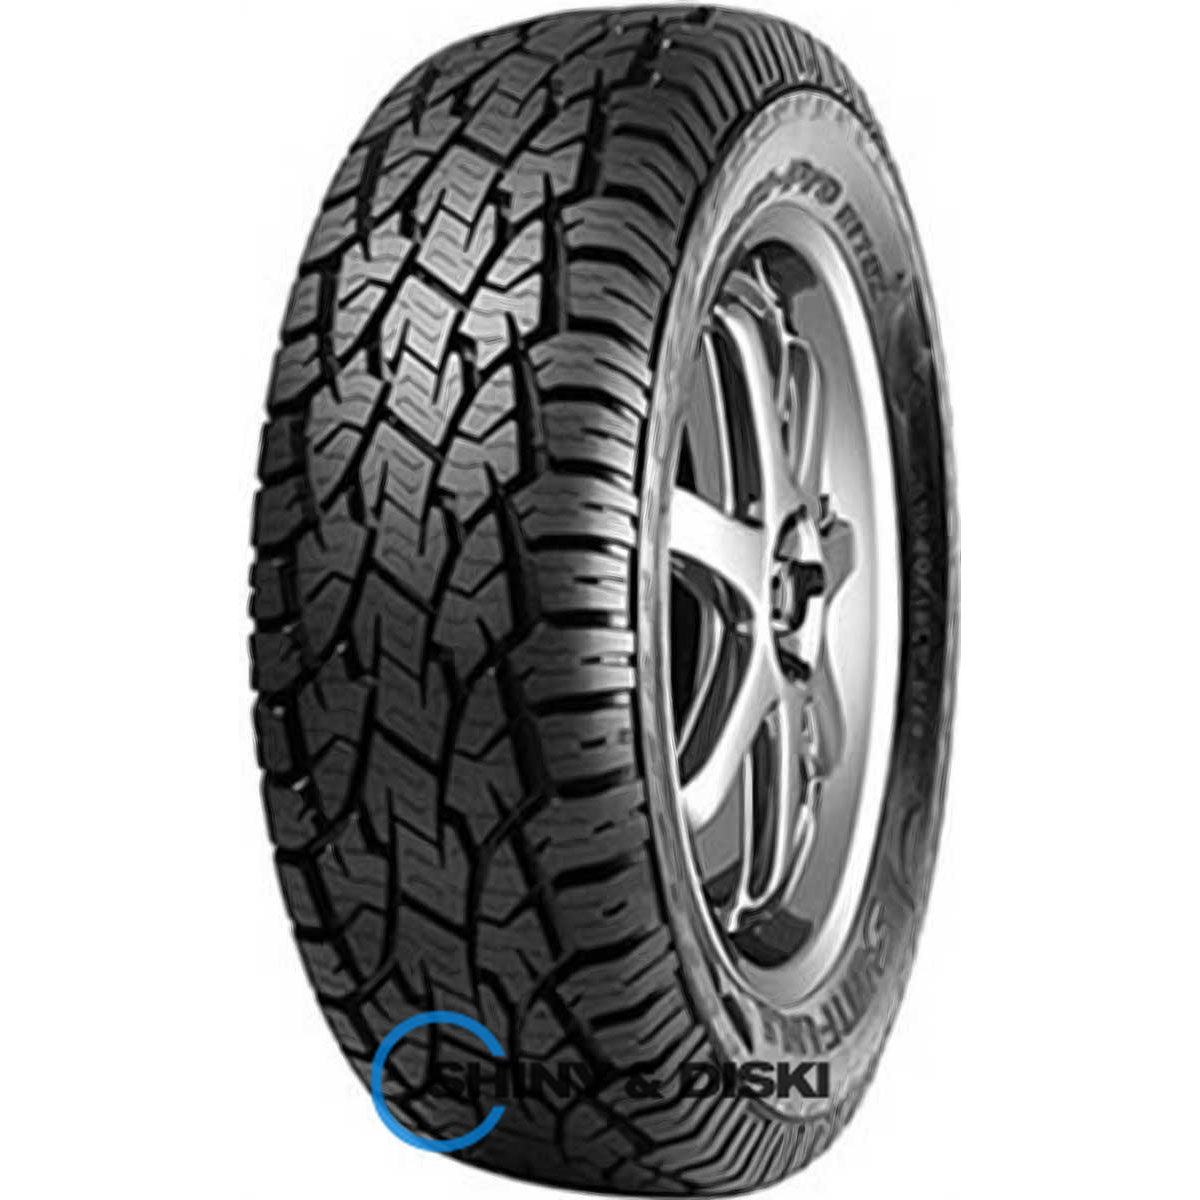 sunfull mont-pro at782 215/85 r16 115/112r